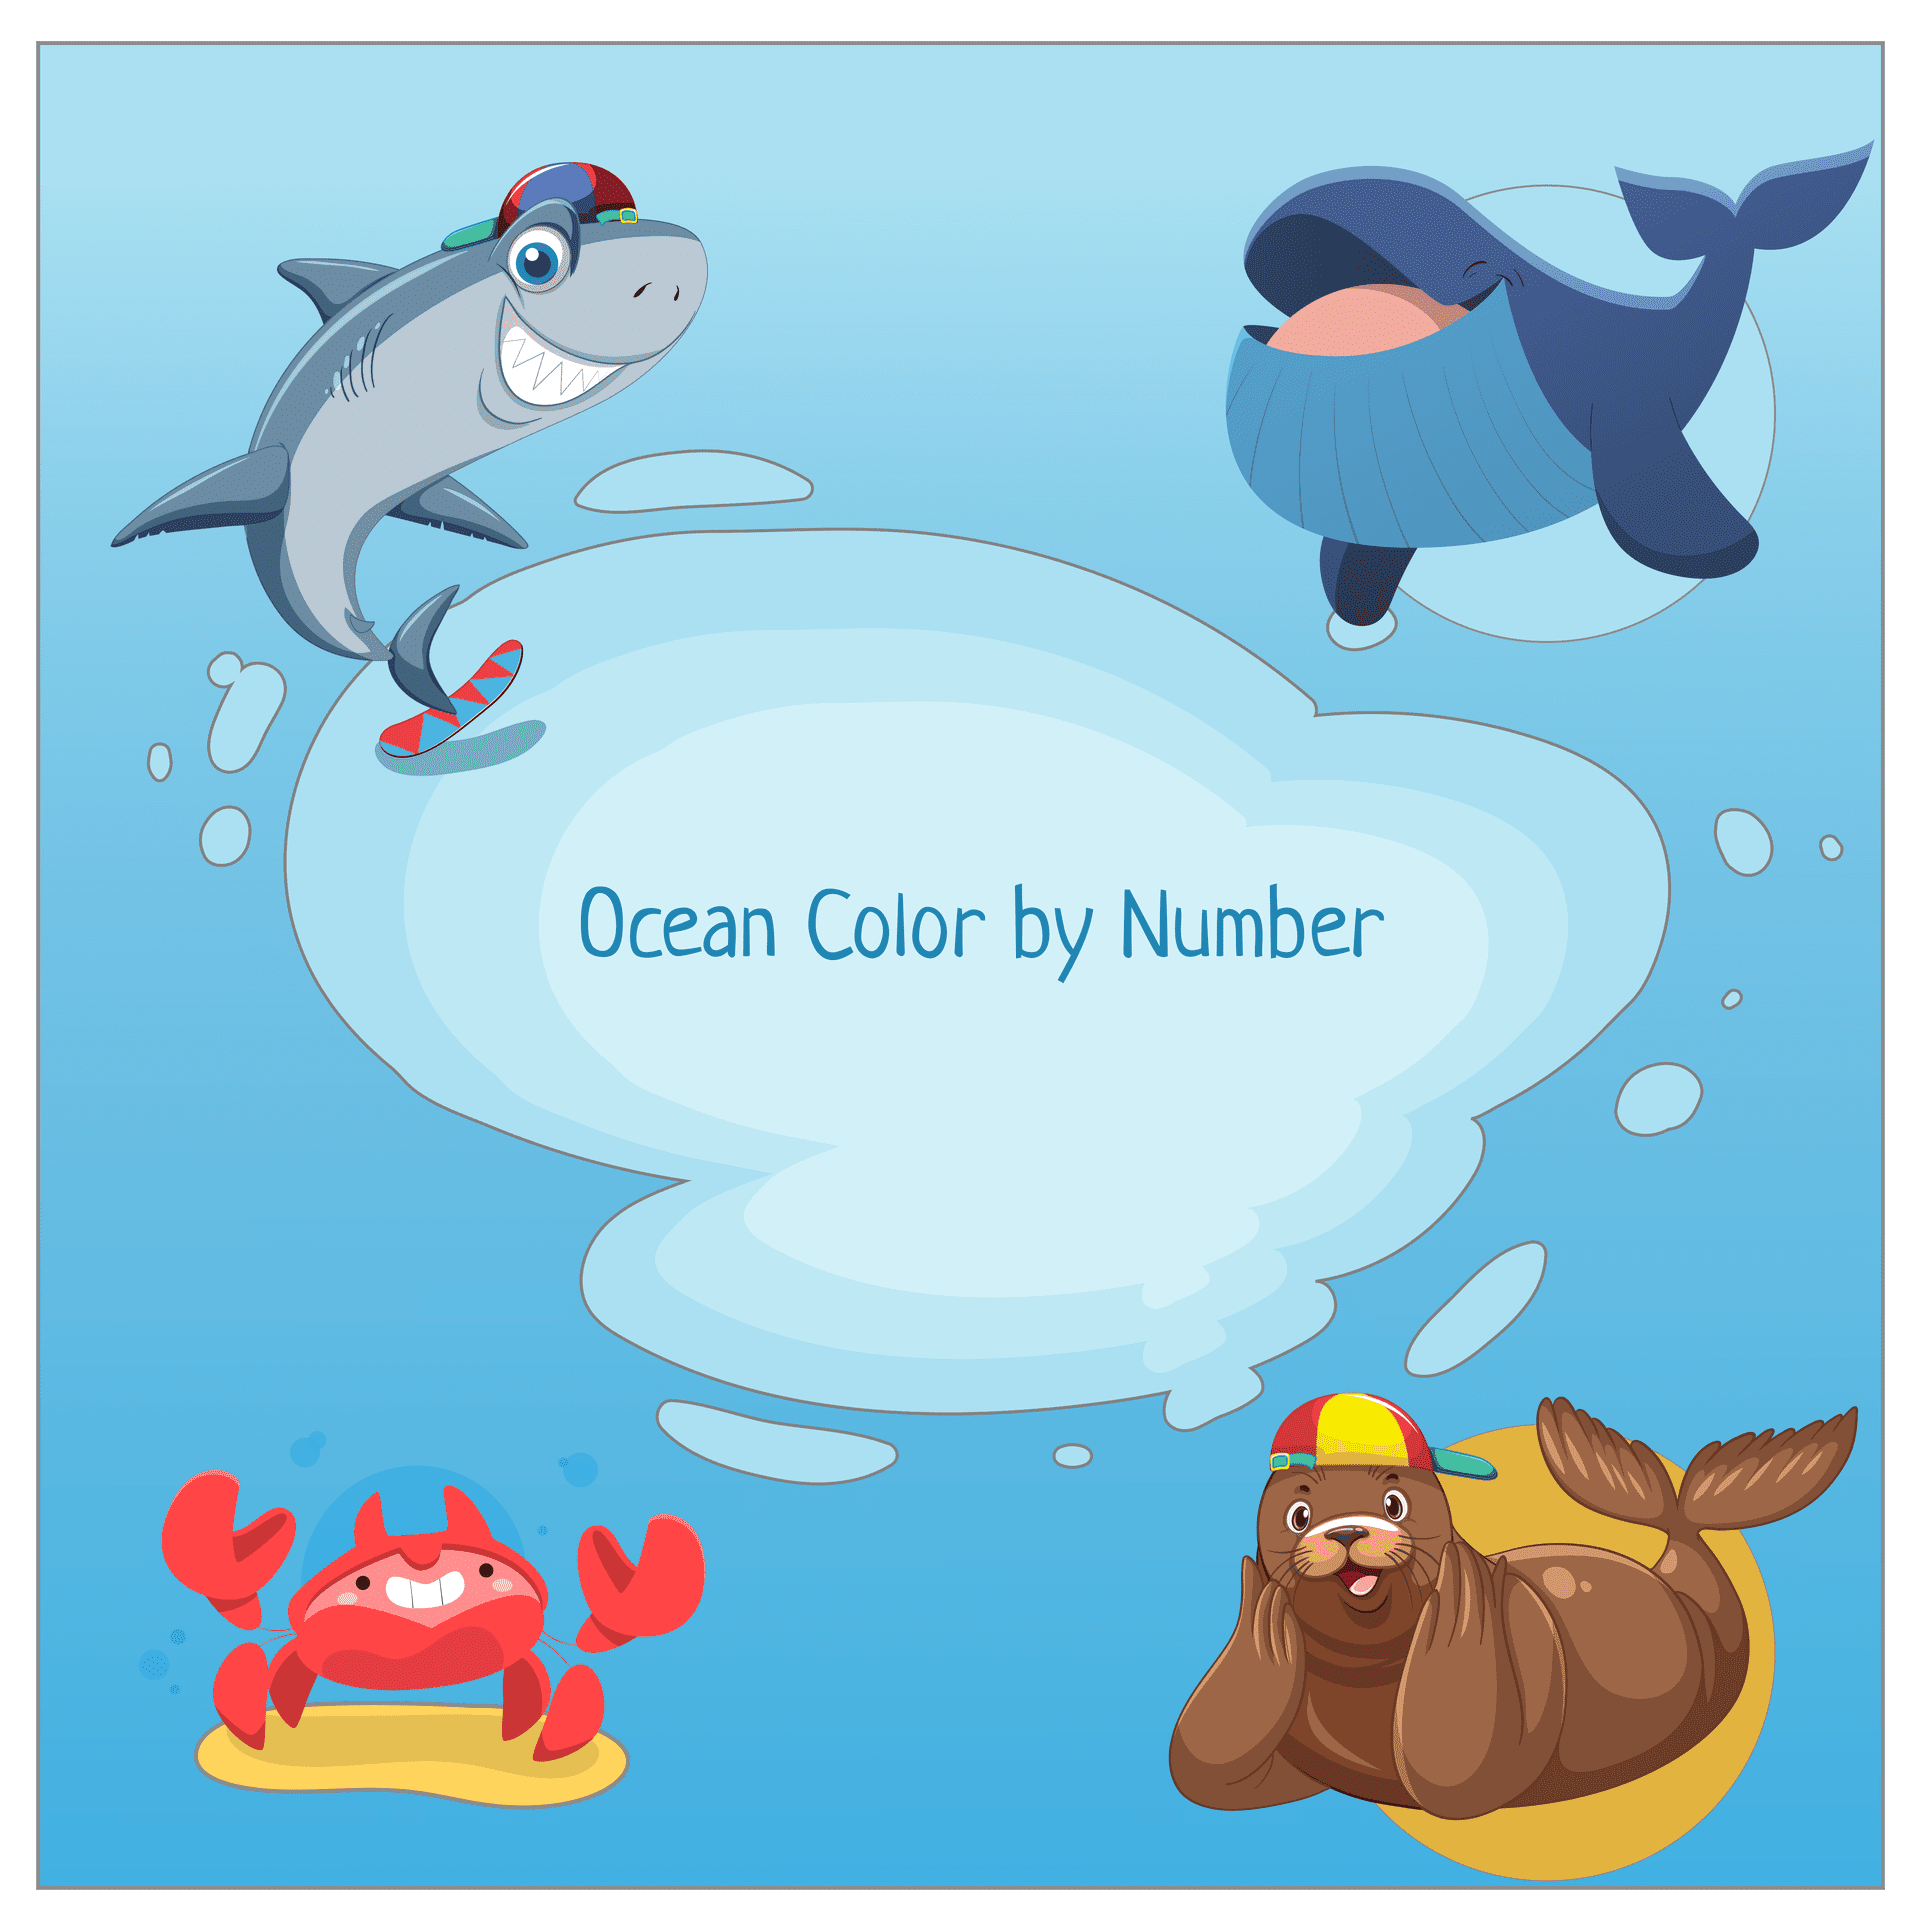 Ocean color by number overview